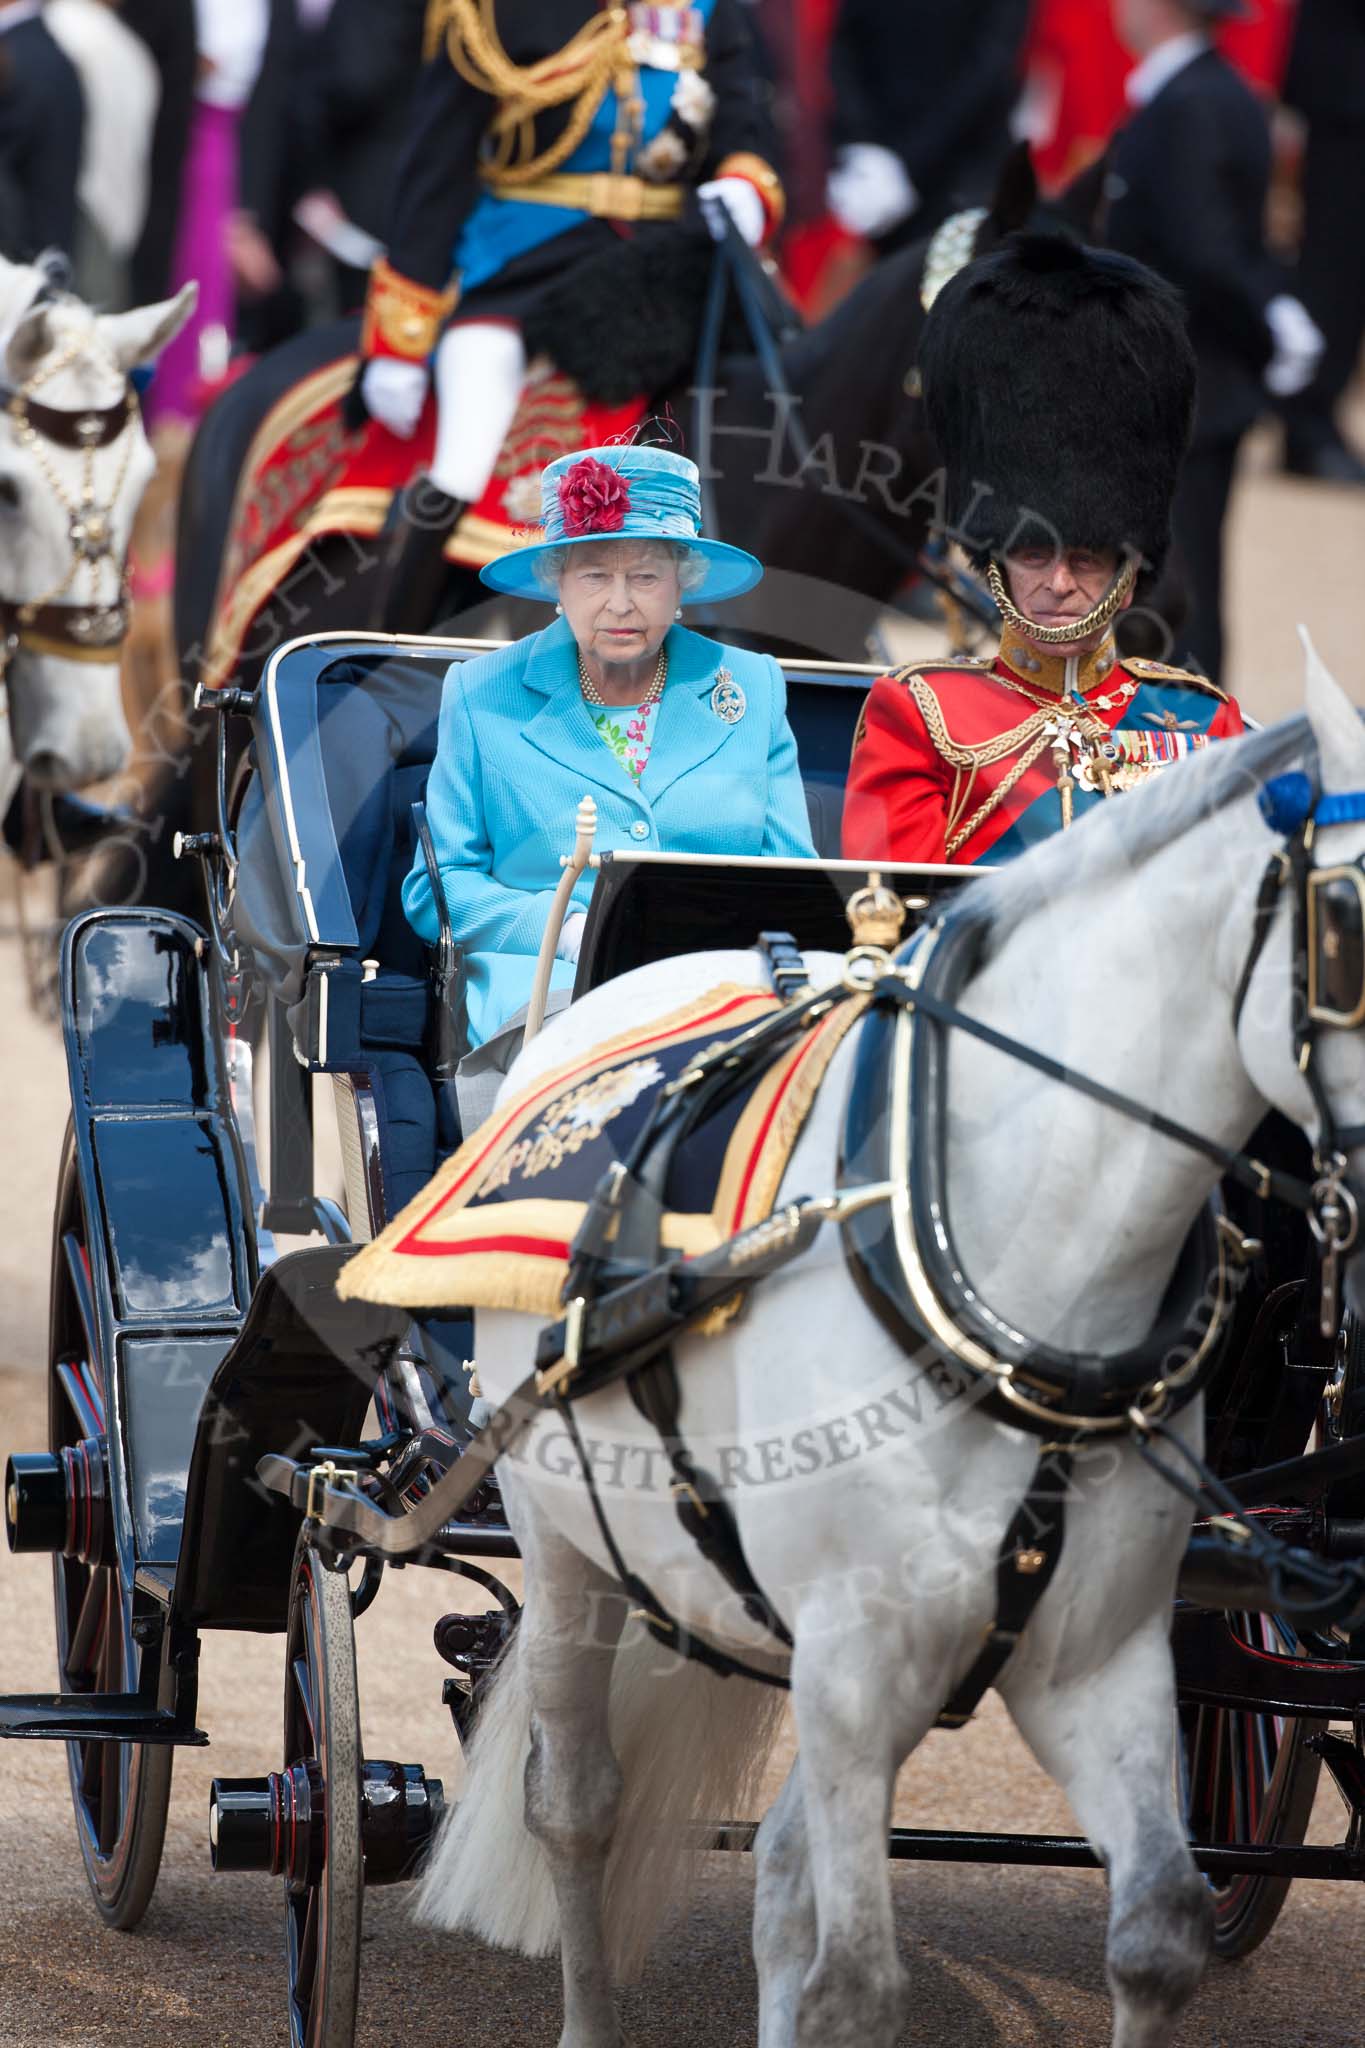 Trooping the Colour 2009: The ivory mounted phaeton with HM The Queen and HRH The Duke of Edinburgh on horse guards parade..
Horse Guards Parade, Westminster,
London SW1,

United Kingdom,
on 13 June 2009 at 10:58, image #124